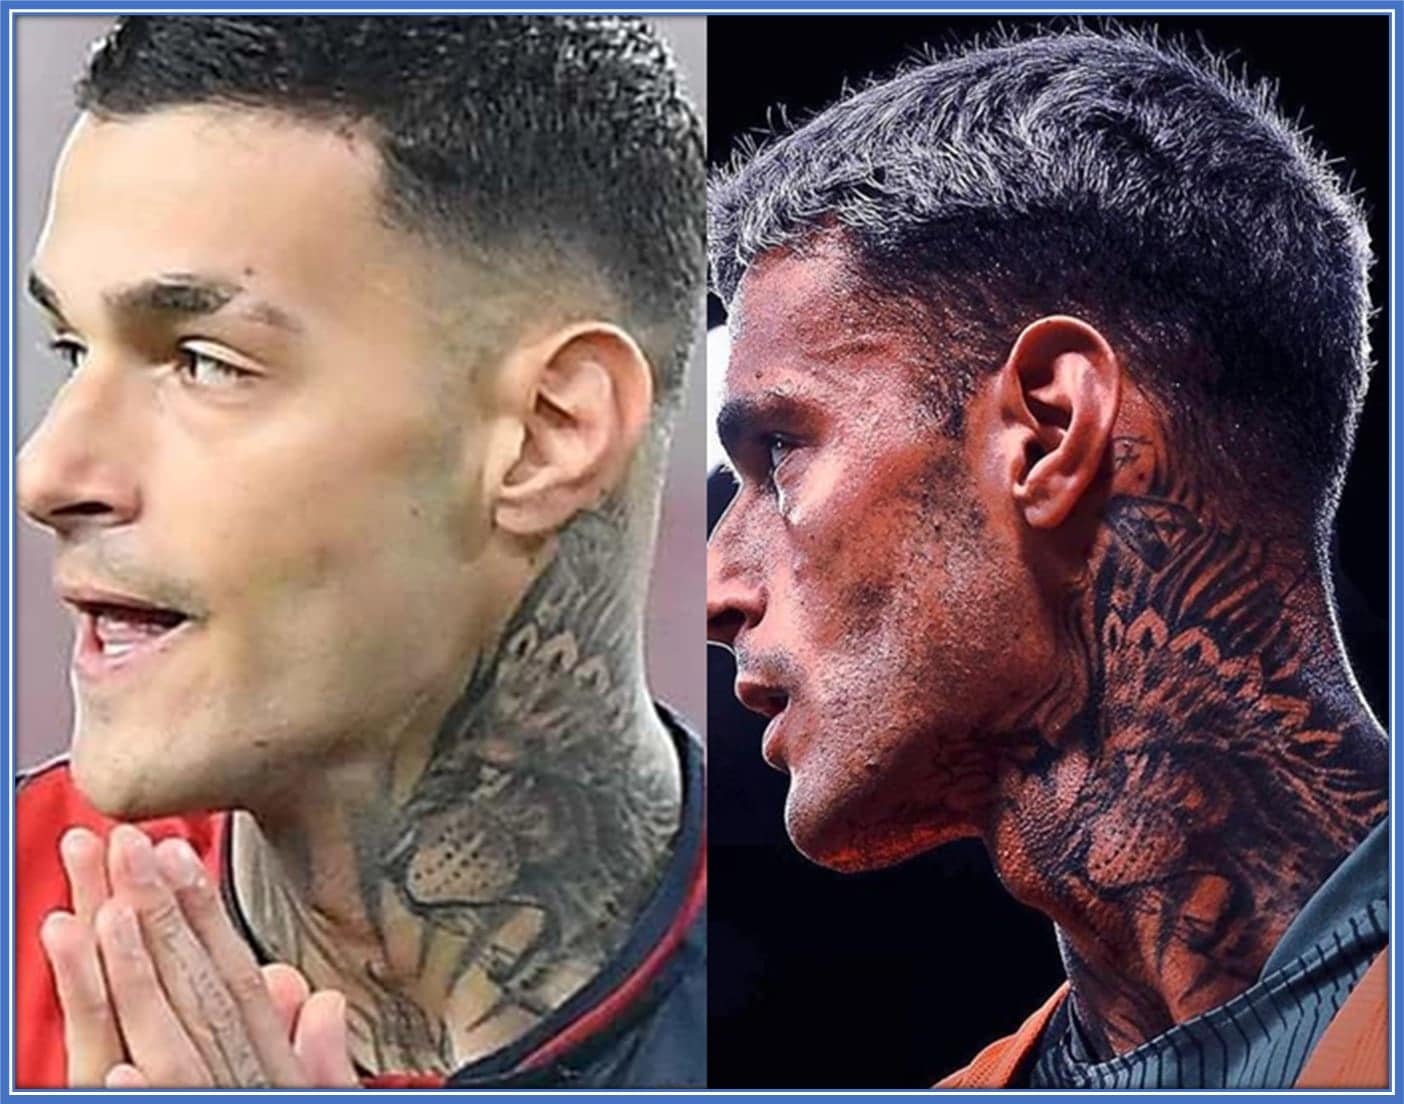 Scamacca said he wouldn't get away with defenders like Bonucci and Chiellini if he didn't have this beast neck tattoo.